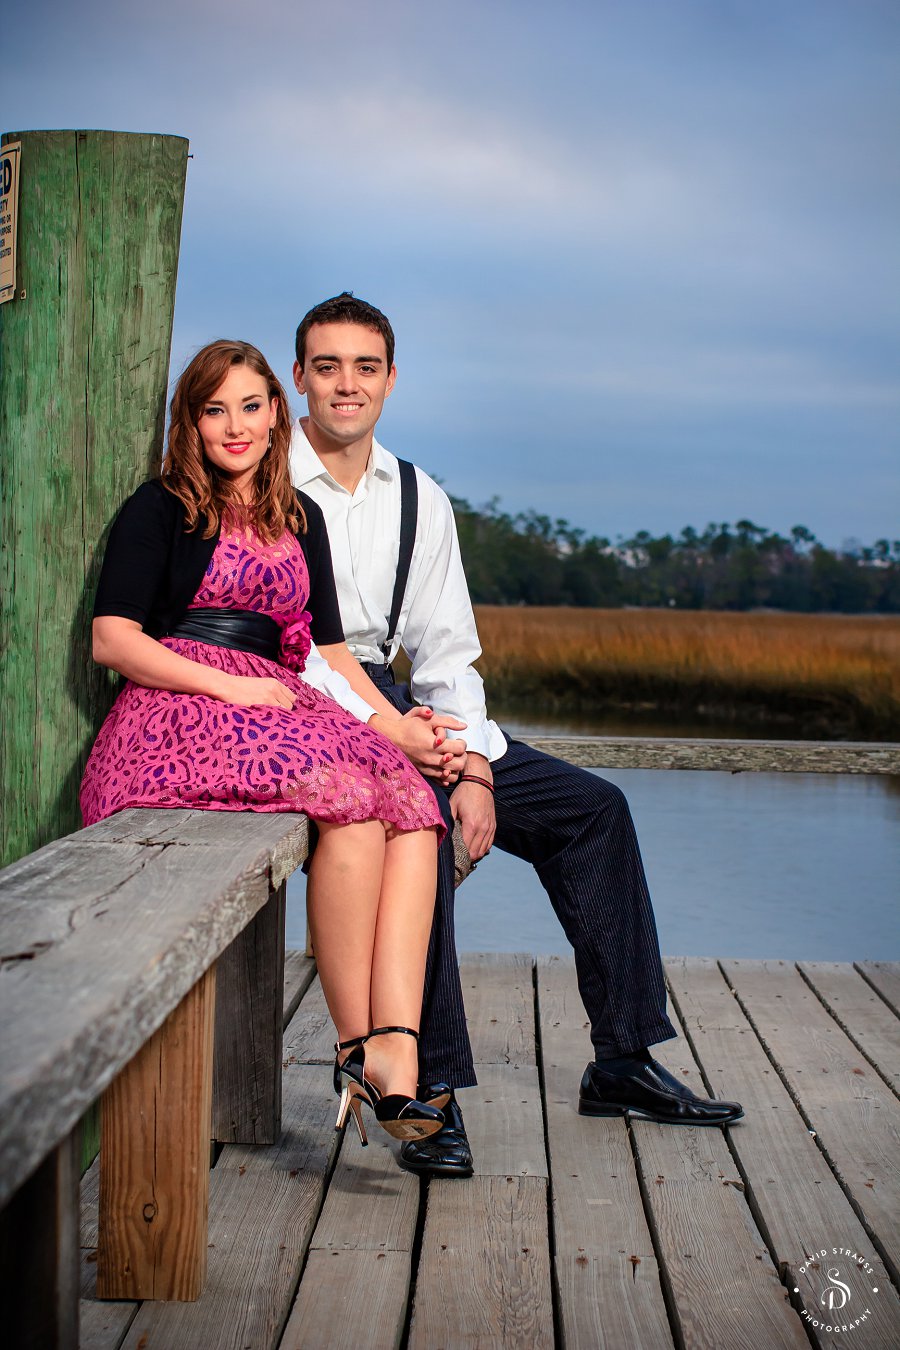 Boone Hall Engagement Pictures - Charleston Wedding Photographer David Strauss - Morgan and Andrew - 13